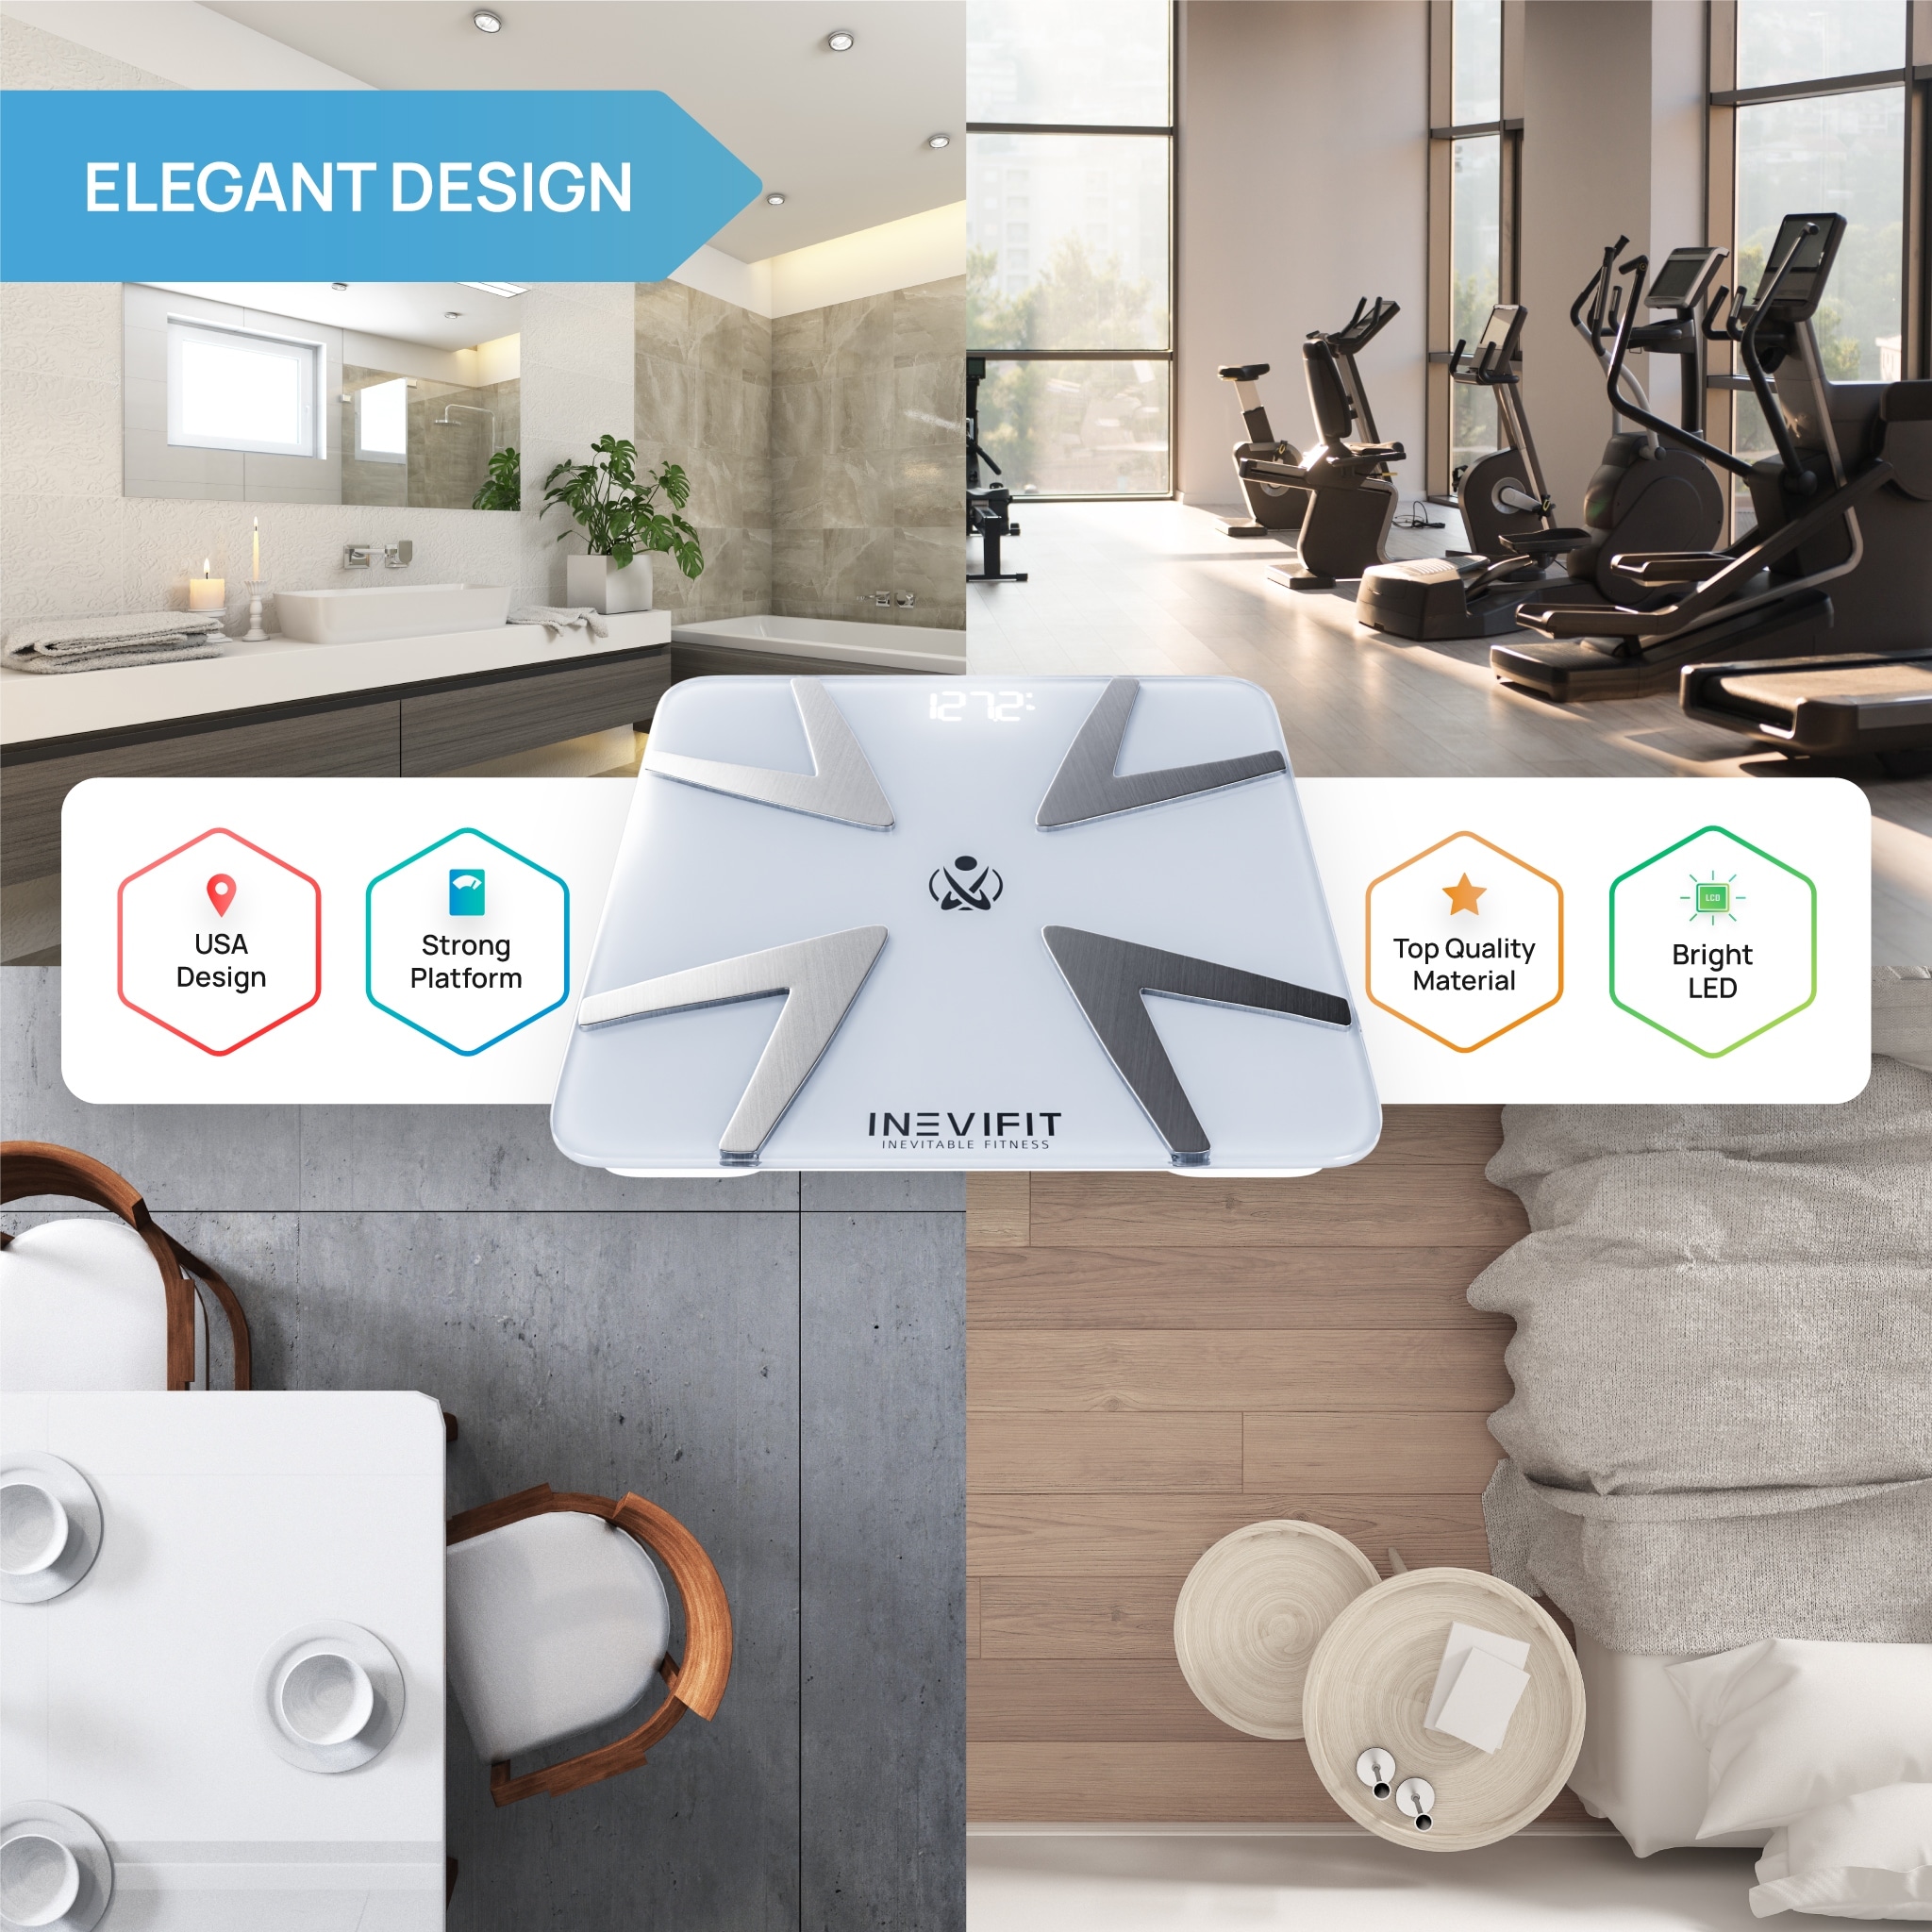 https://ak1.ostkcdn.com/images/products/is/images/direct/23370cb5b6e7c84ae7df5e9dcb875b432ec3a895/Smart-Body-Fat-Scale-with-Bluetooth---White.jpg